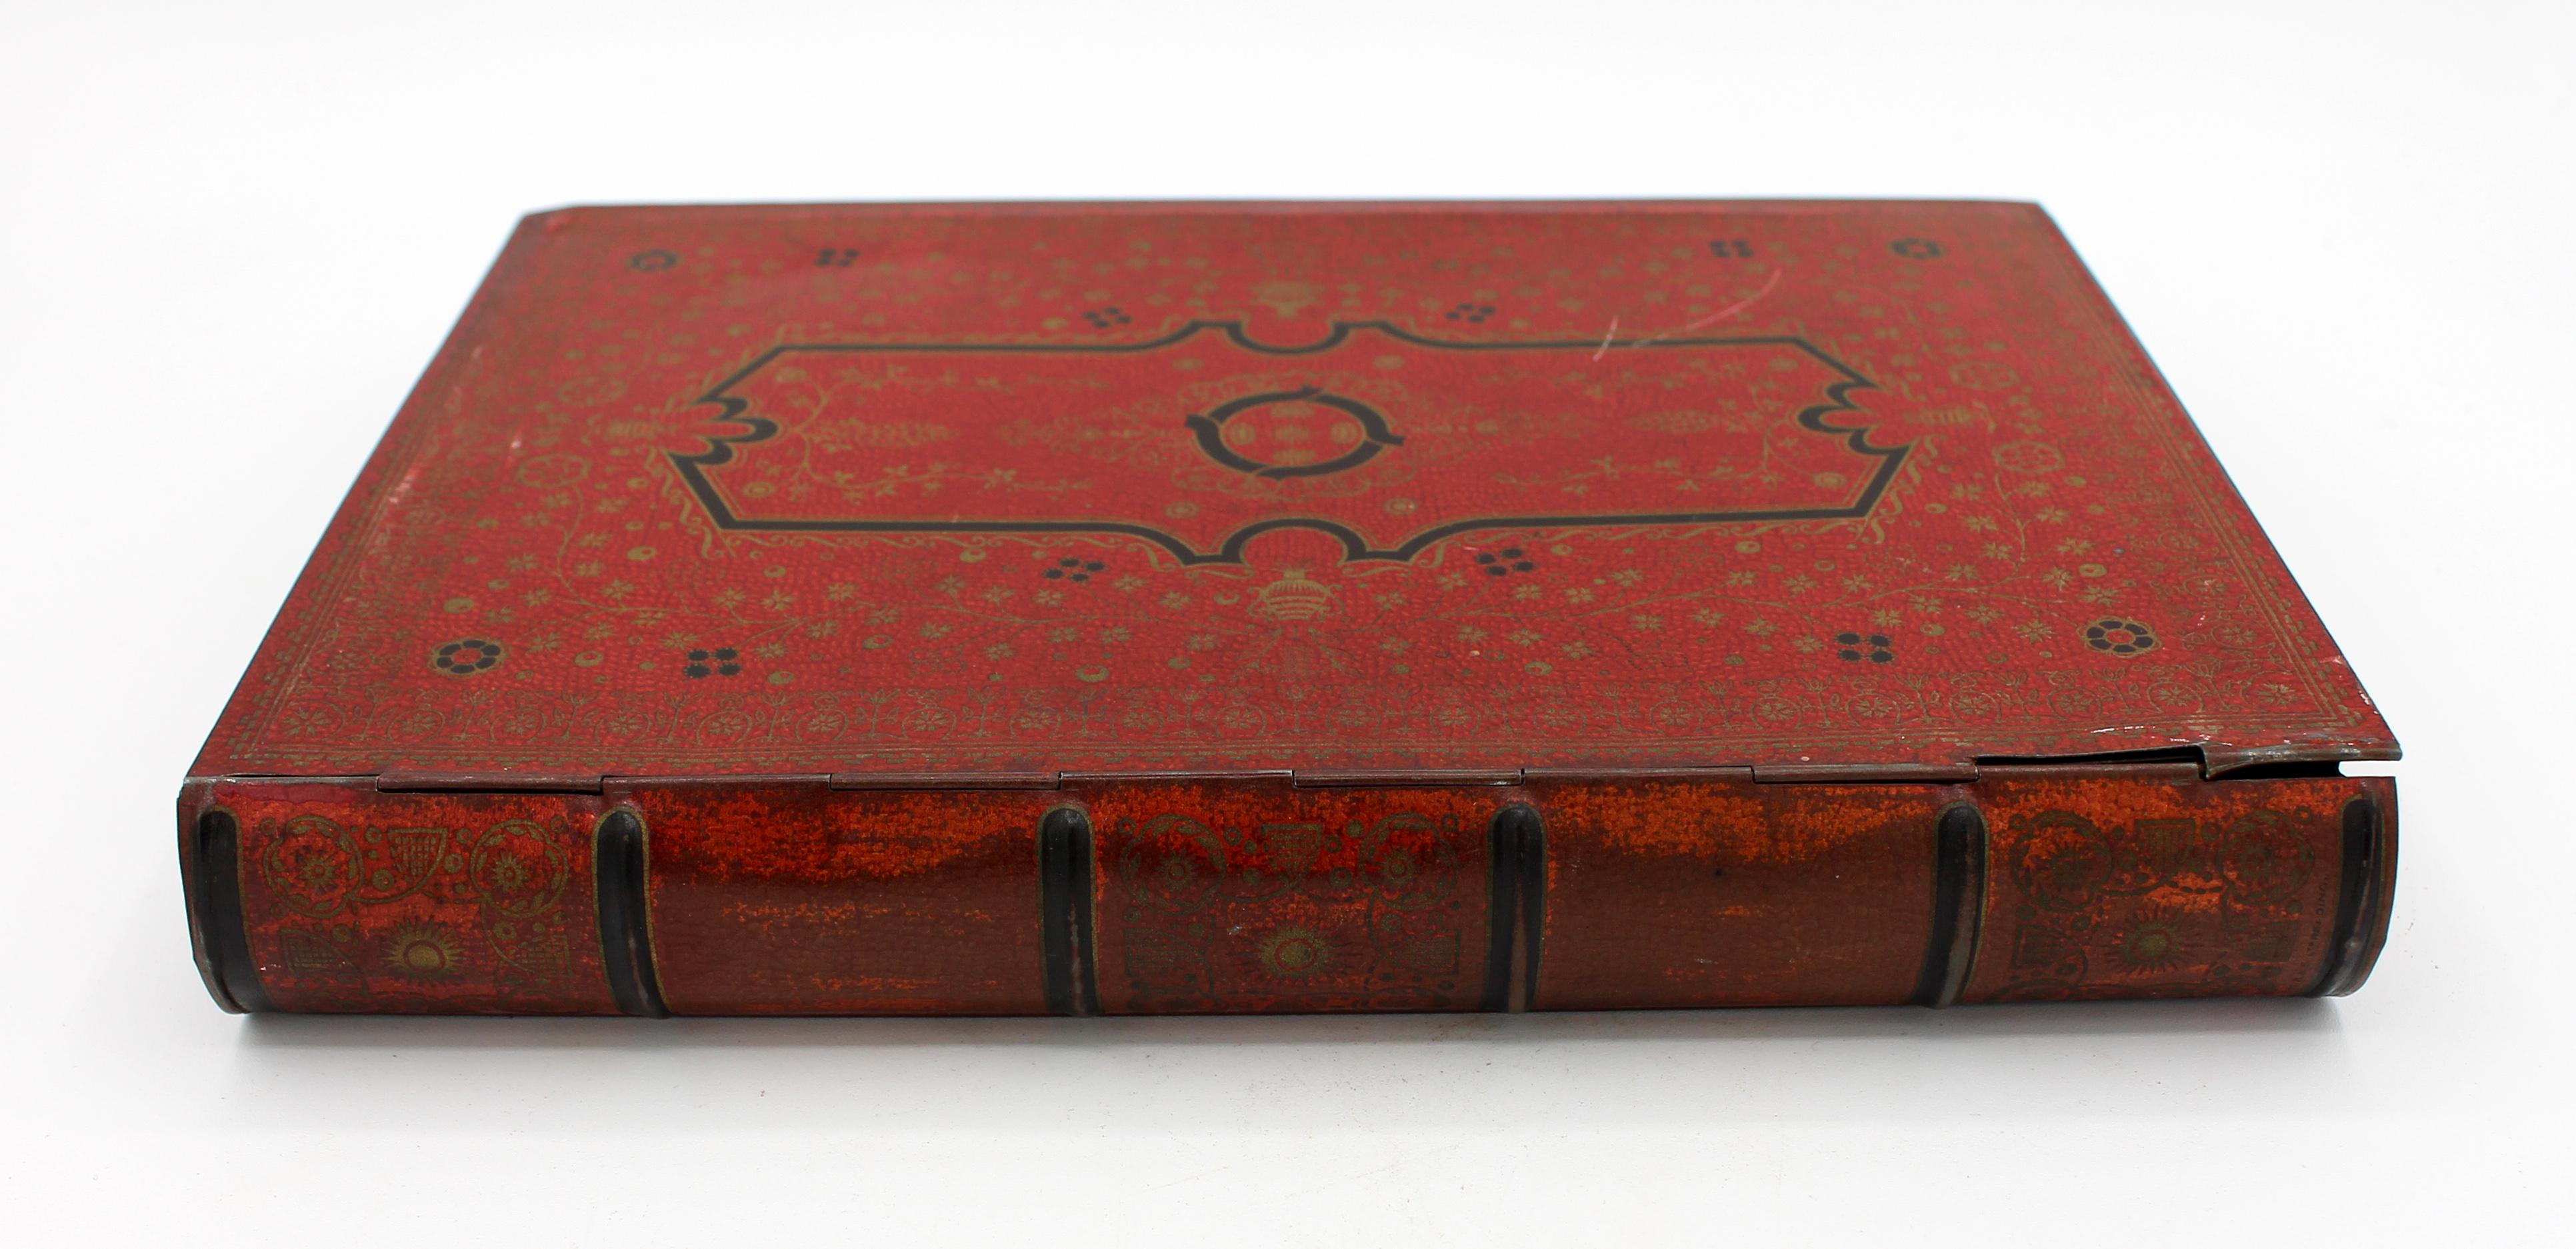 Large scarlet book form biscuit tin box by Huntley & Palmers, c.1930s-40s, English. Scarlet with black & gilt cartouche & floral designs, with gilt 